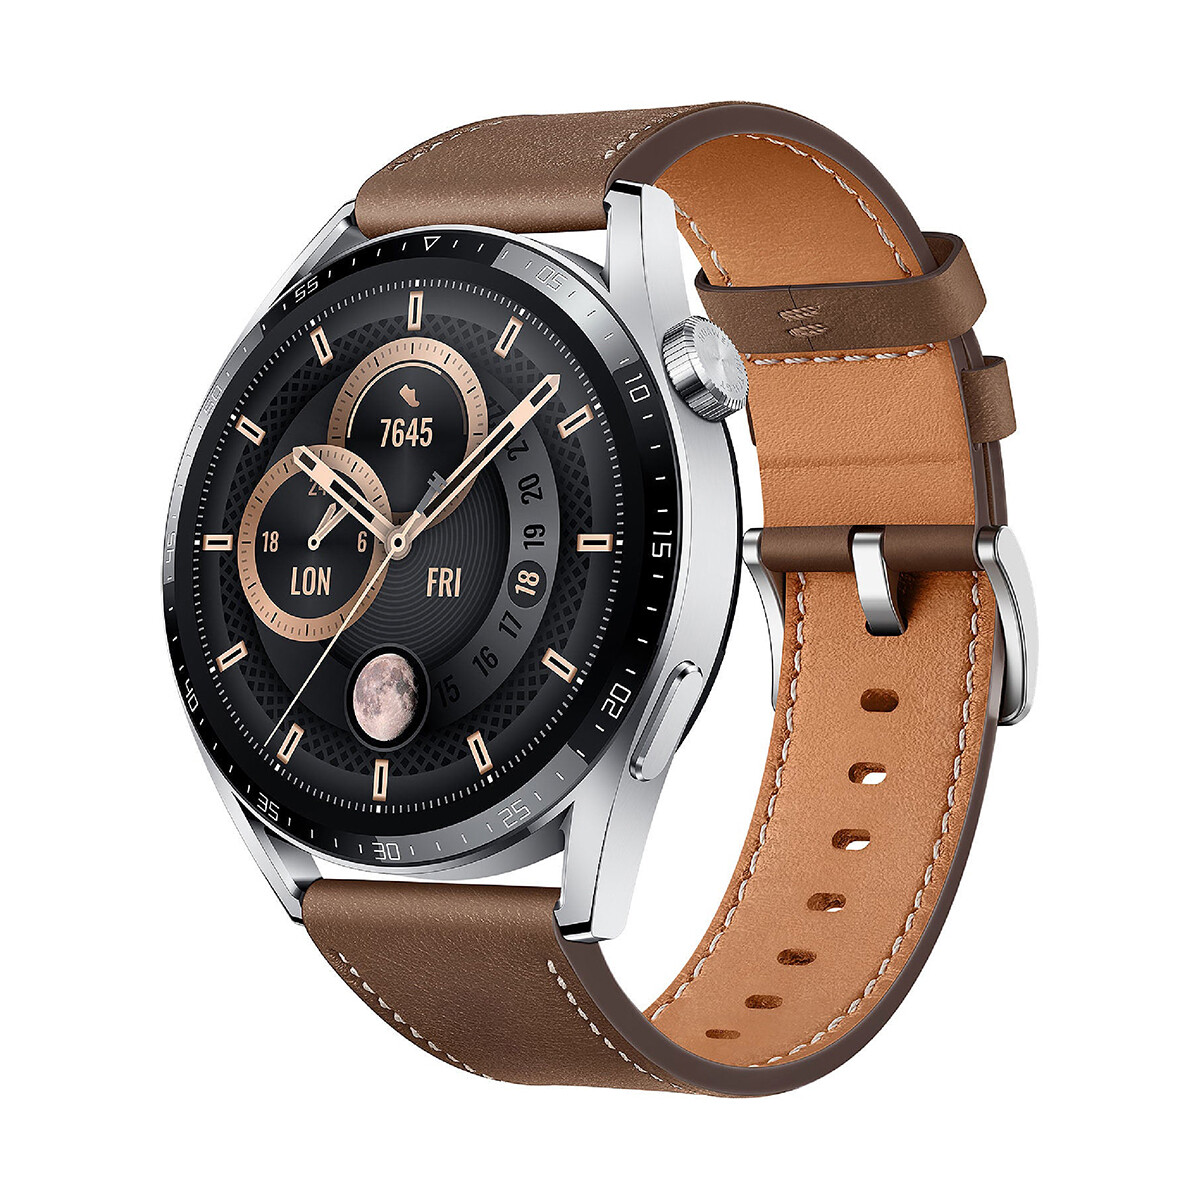 Huawei gt 3 classic edition smartwatch 46mm - Brown 